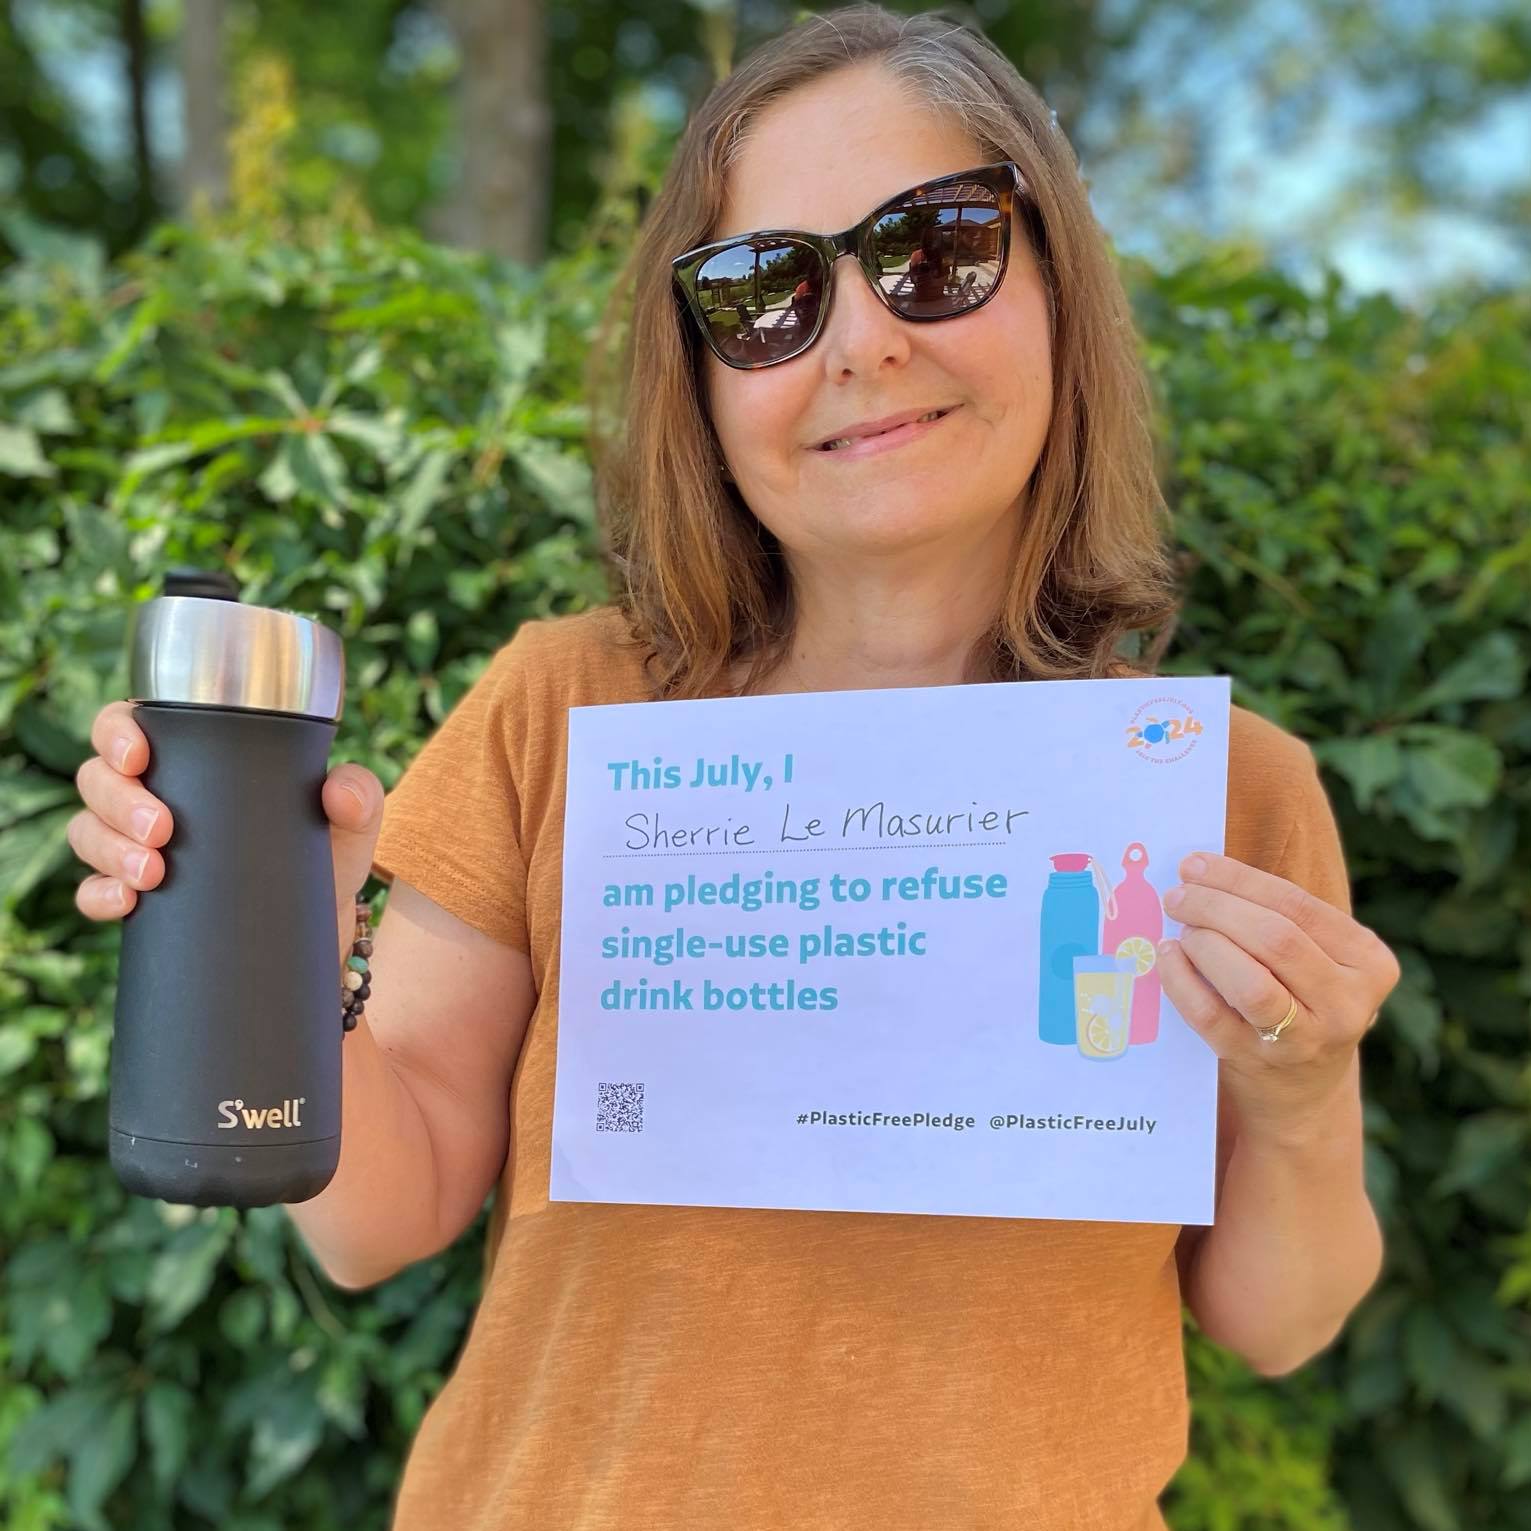 This July, I am pledging to refuse single-use plastic drink bottles